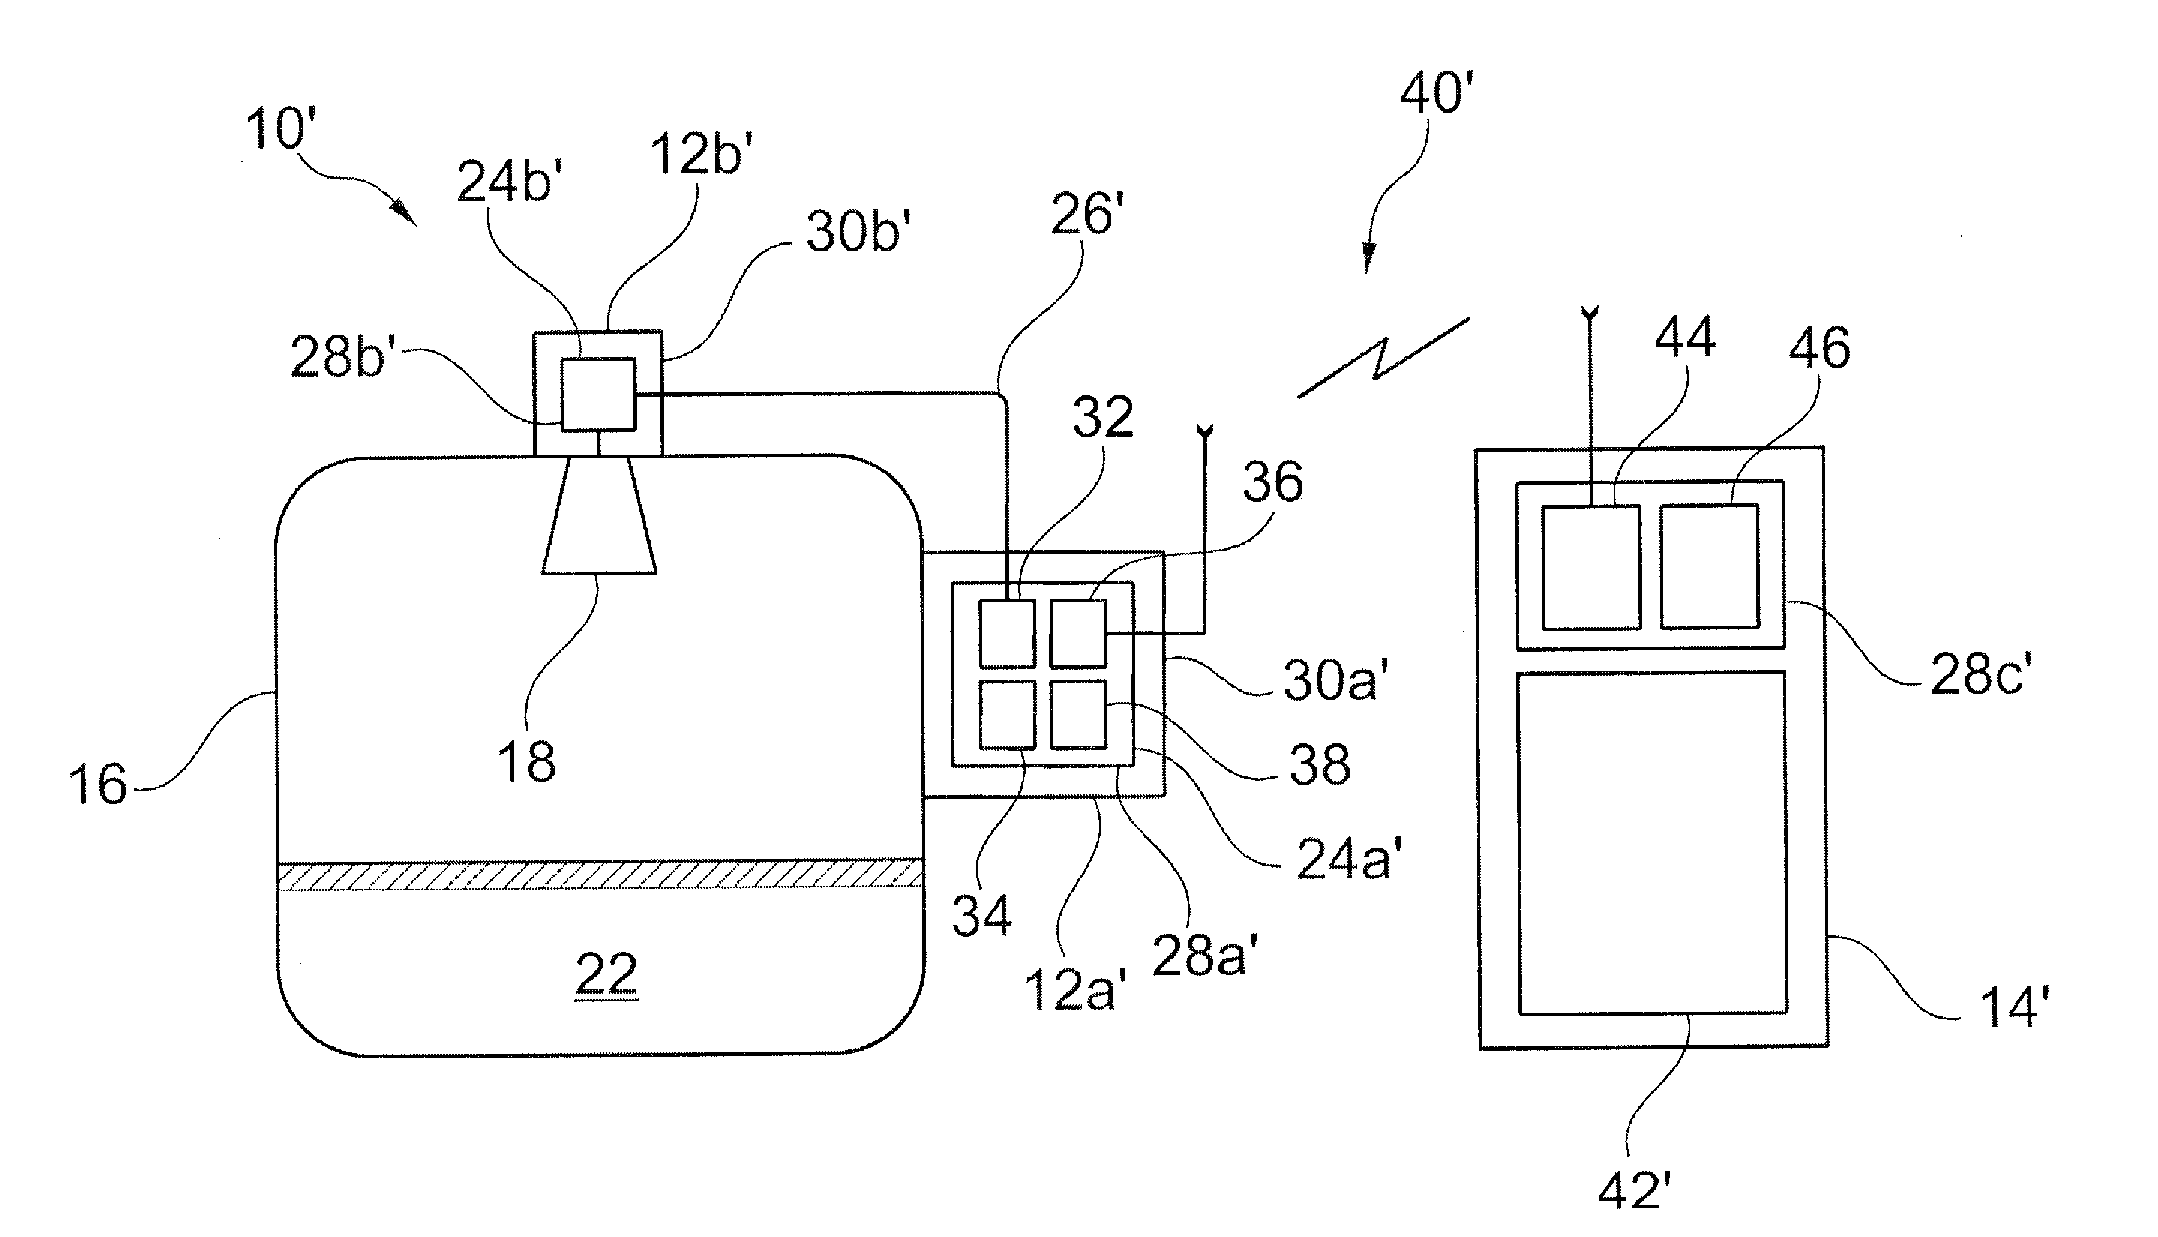 Control Module for a Field Device